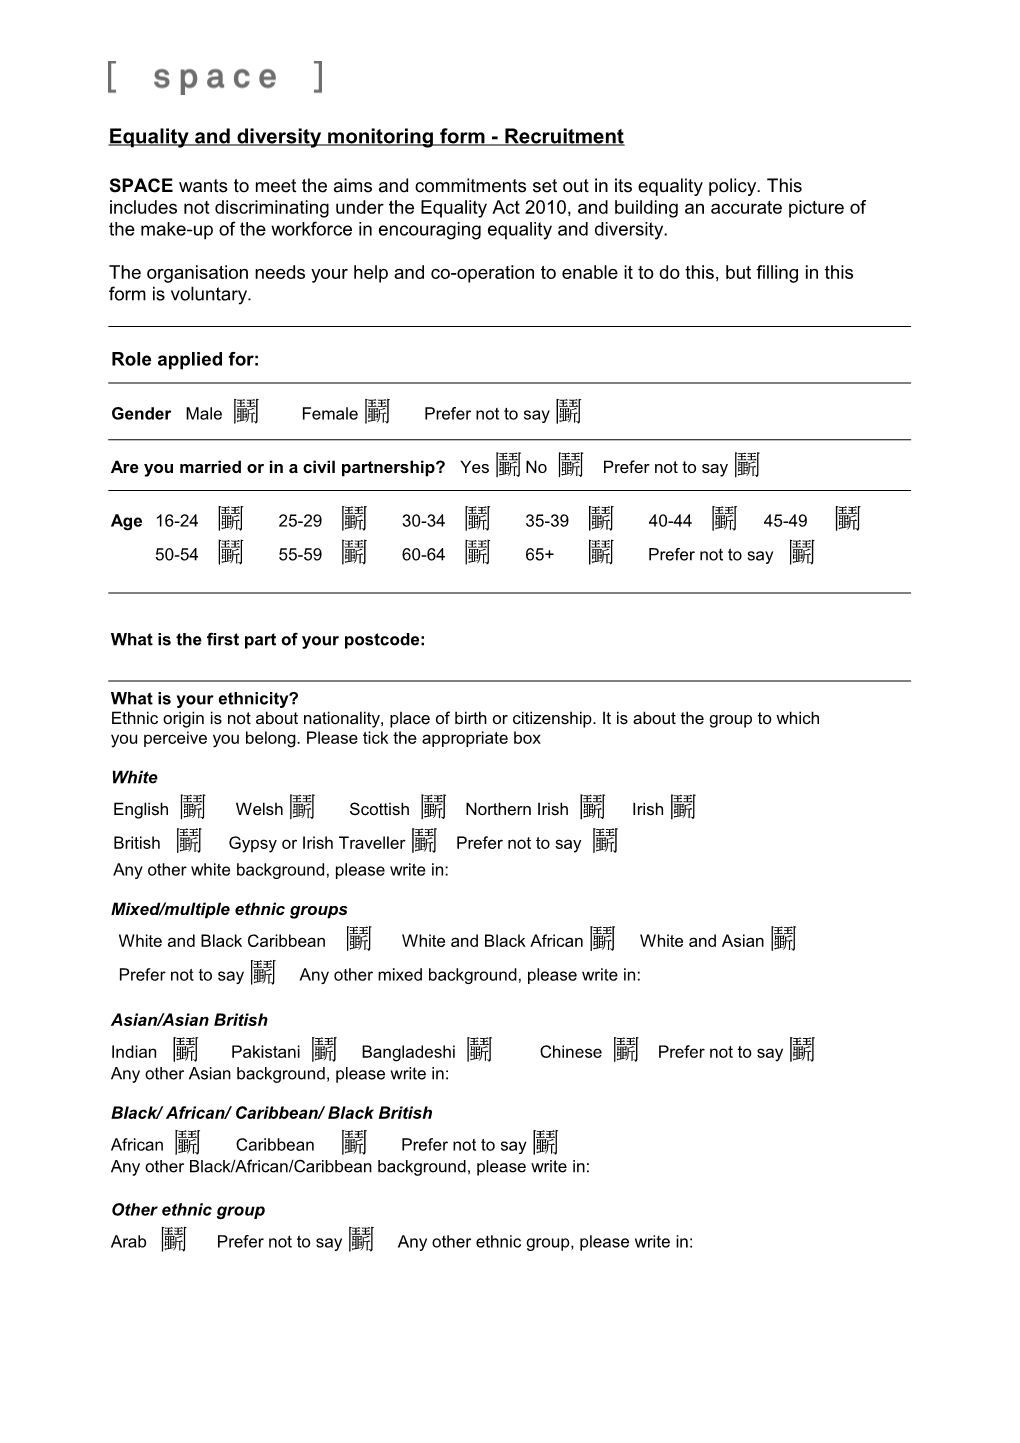 Annex a Sample Equal Opportunities Monitoring Form s1